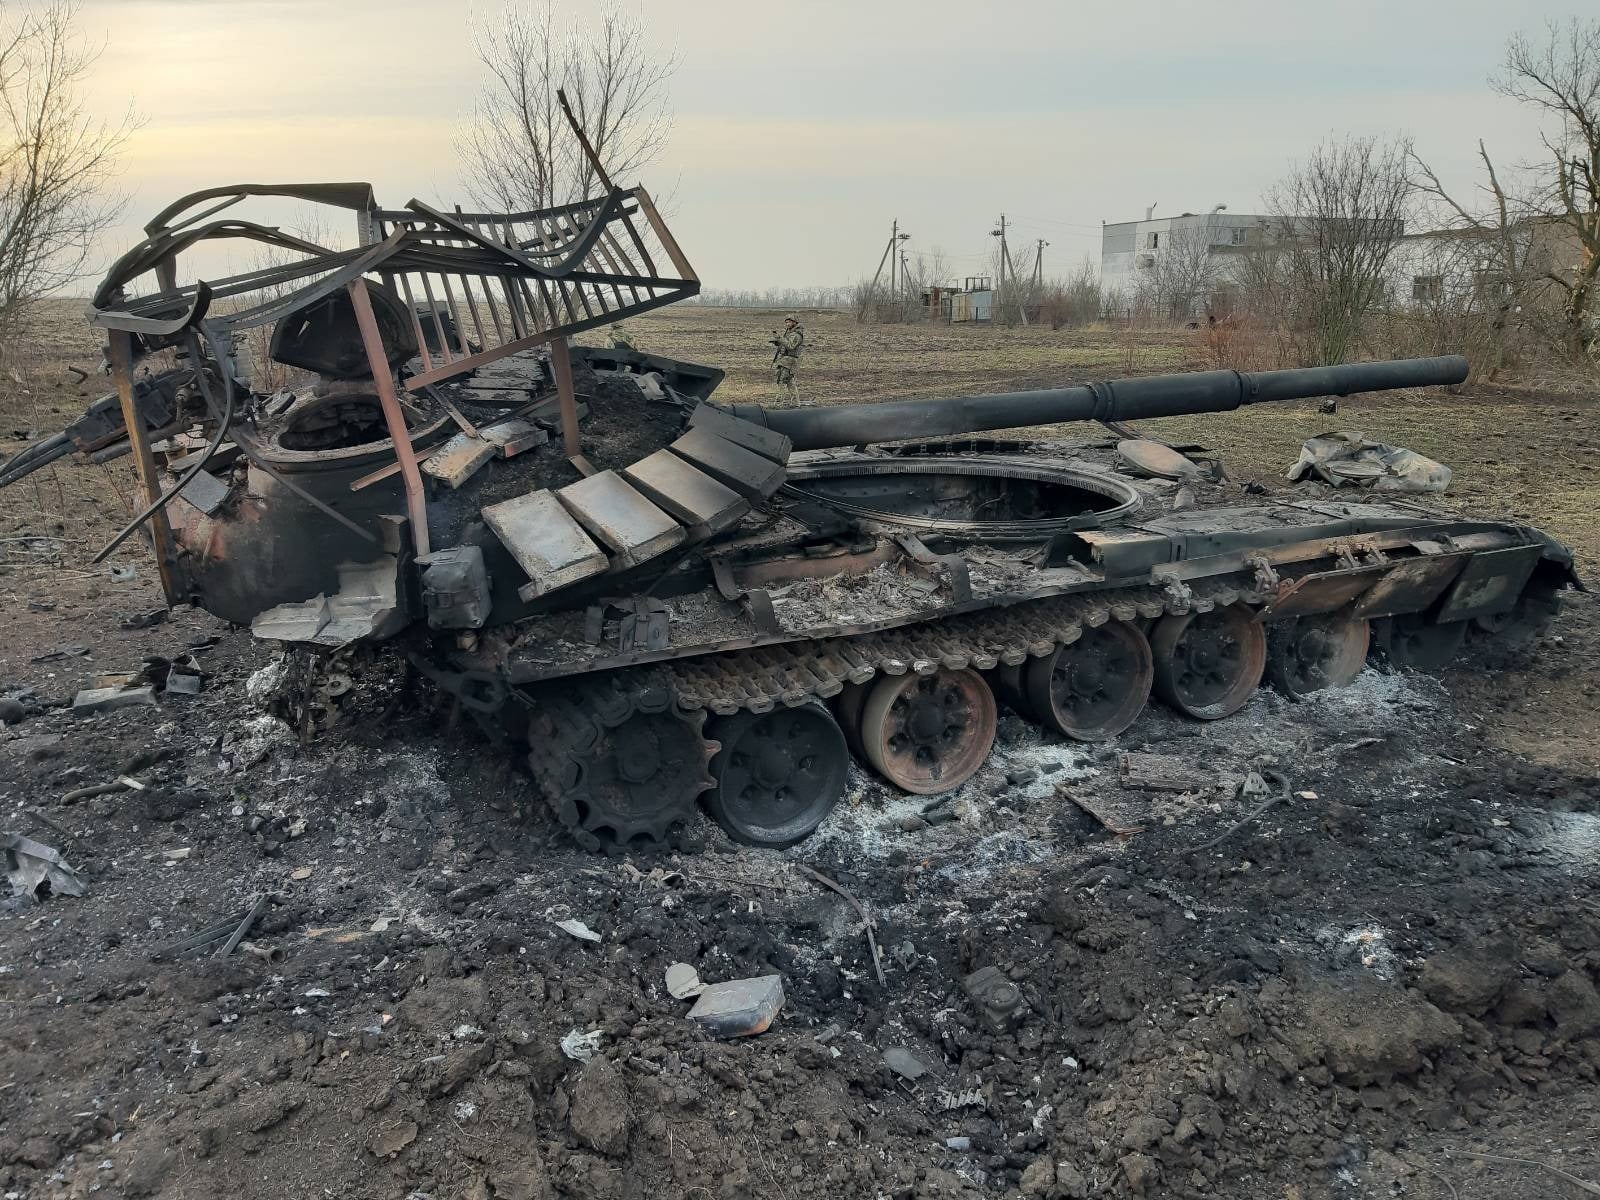 https://defence-blog.com/wp-content/uploads/2023/02/Destroyed_T-72B3_with_cope_cage_1.jpg